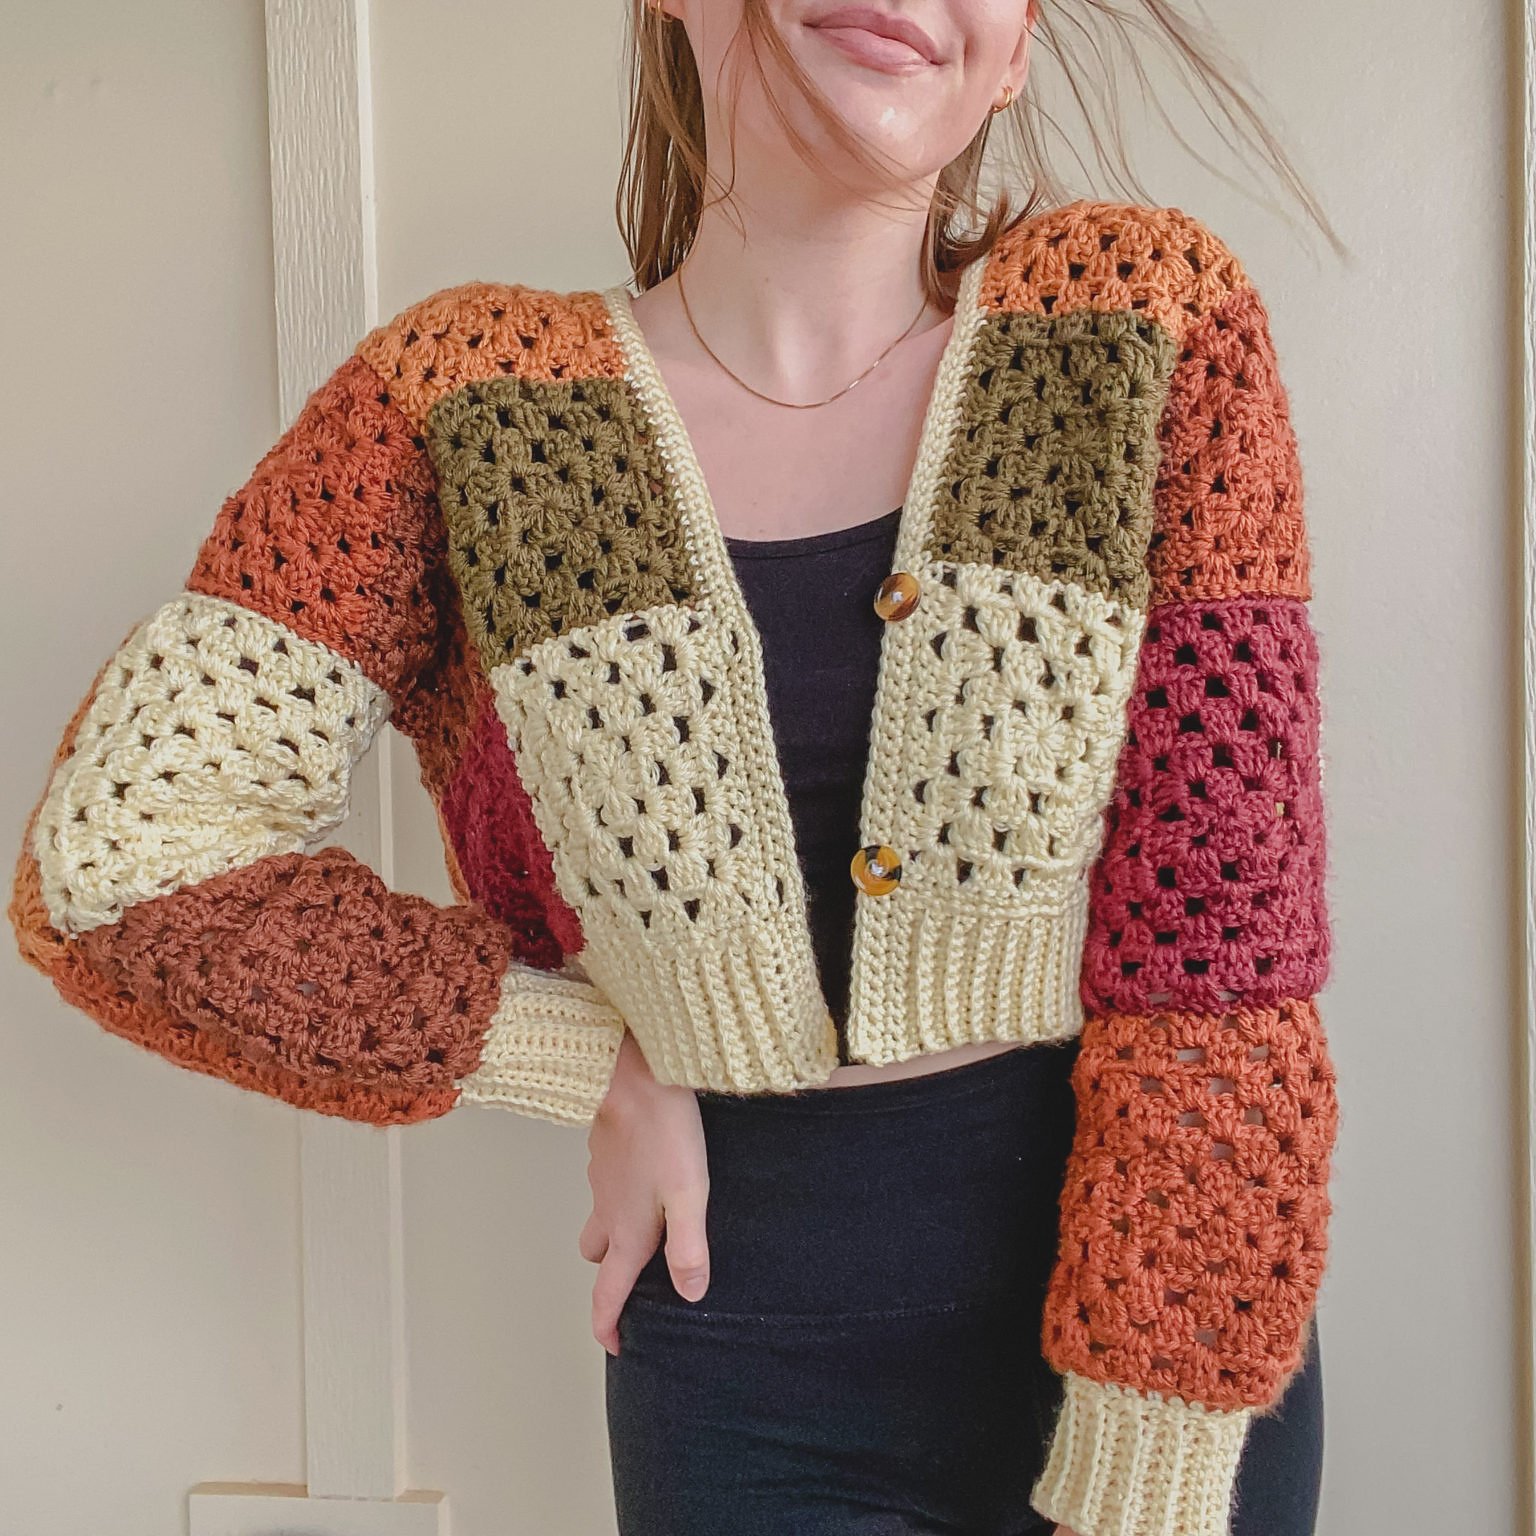 Stay Cozy in These 10 Free Crochet Cardigan Patterns — Blog.NobleKnits